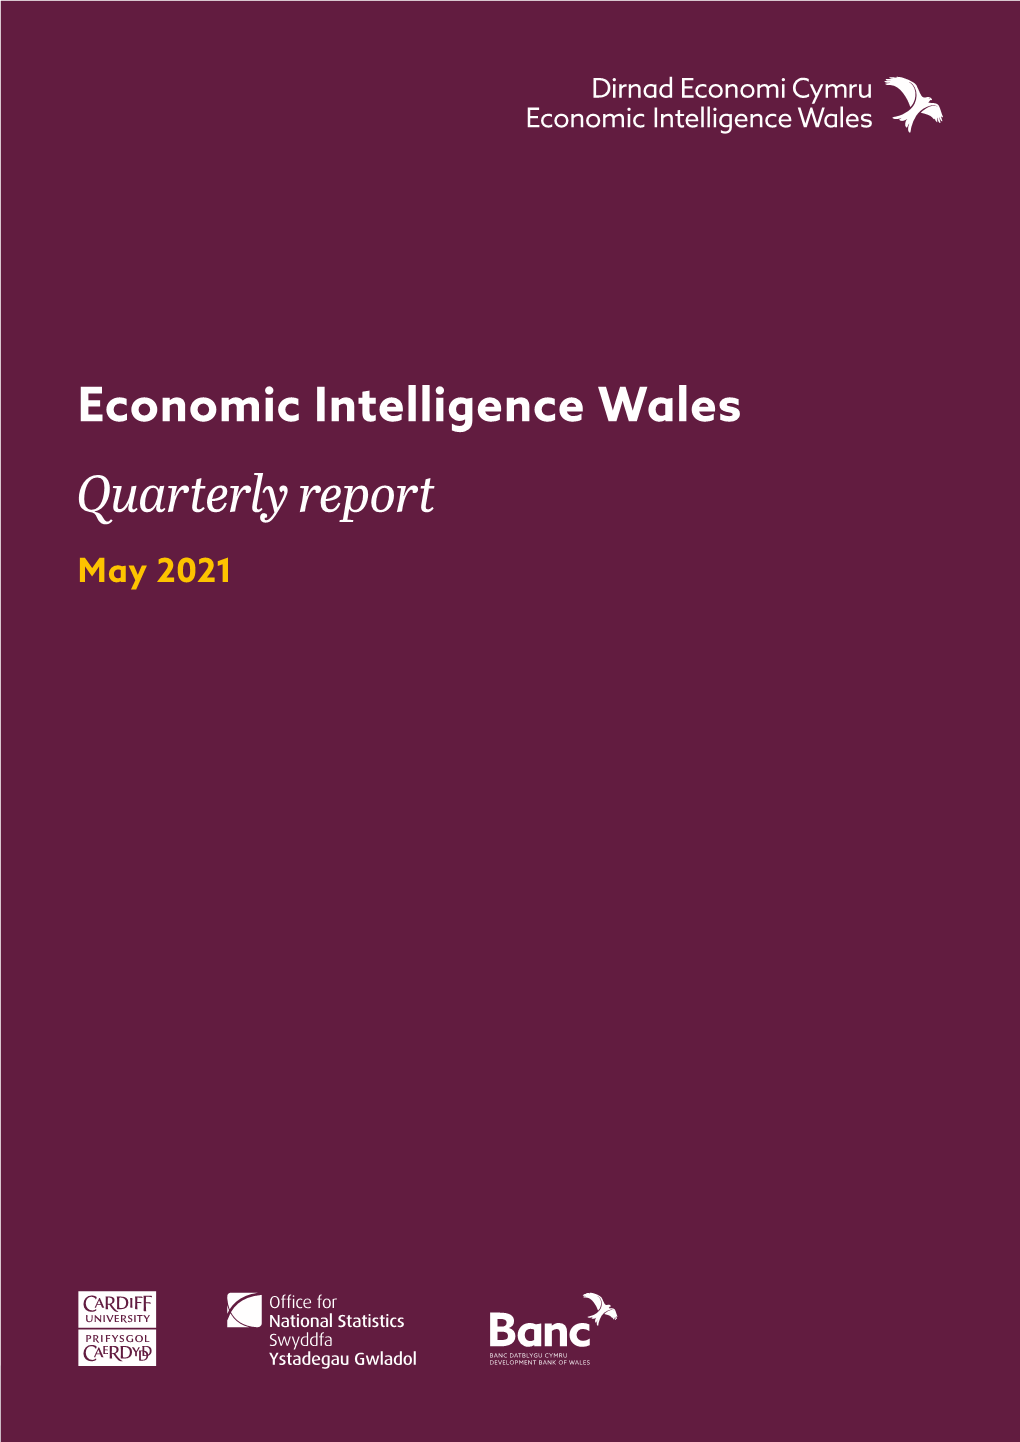 EIW Quarterly Report May 2021